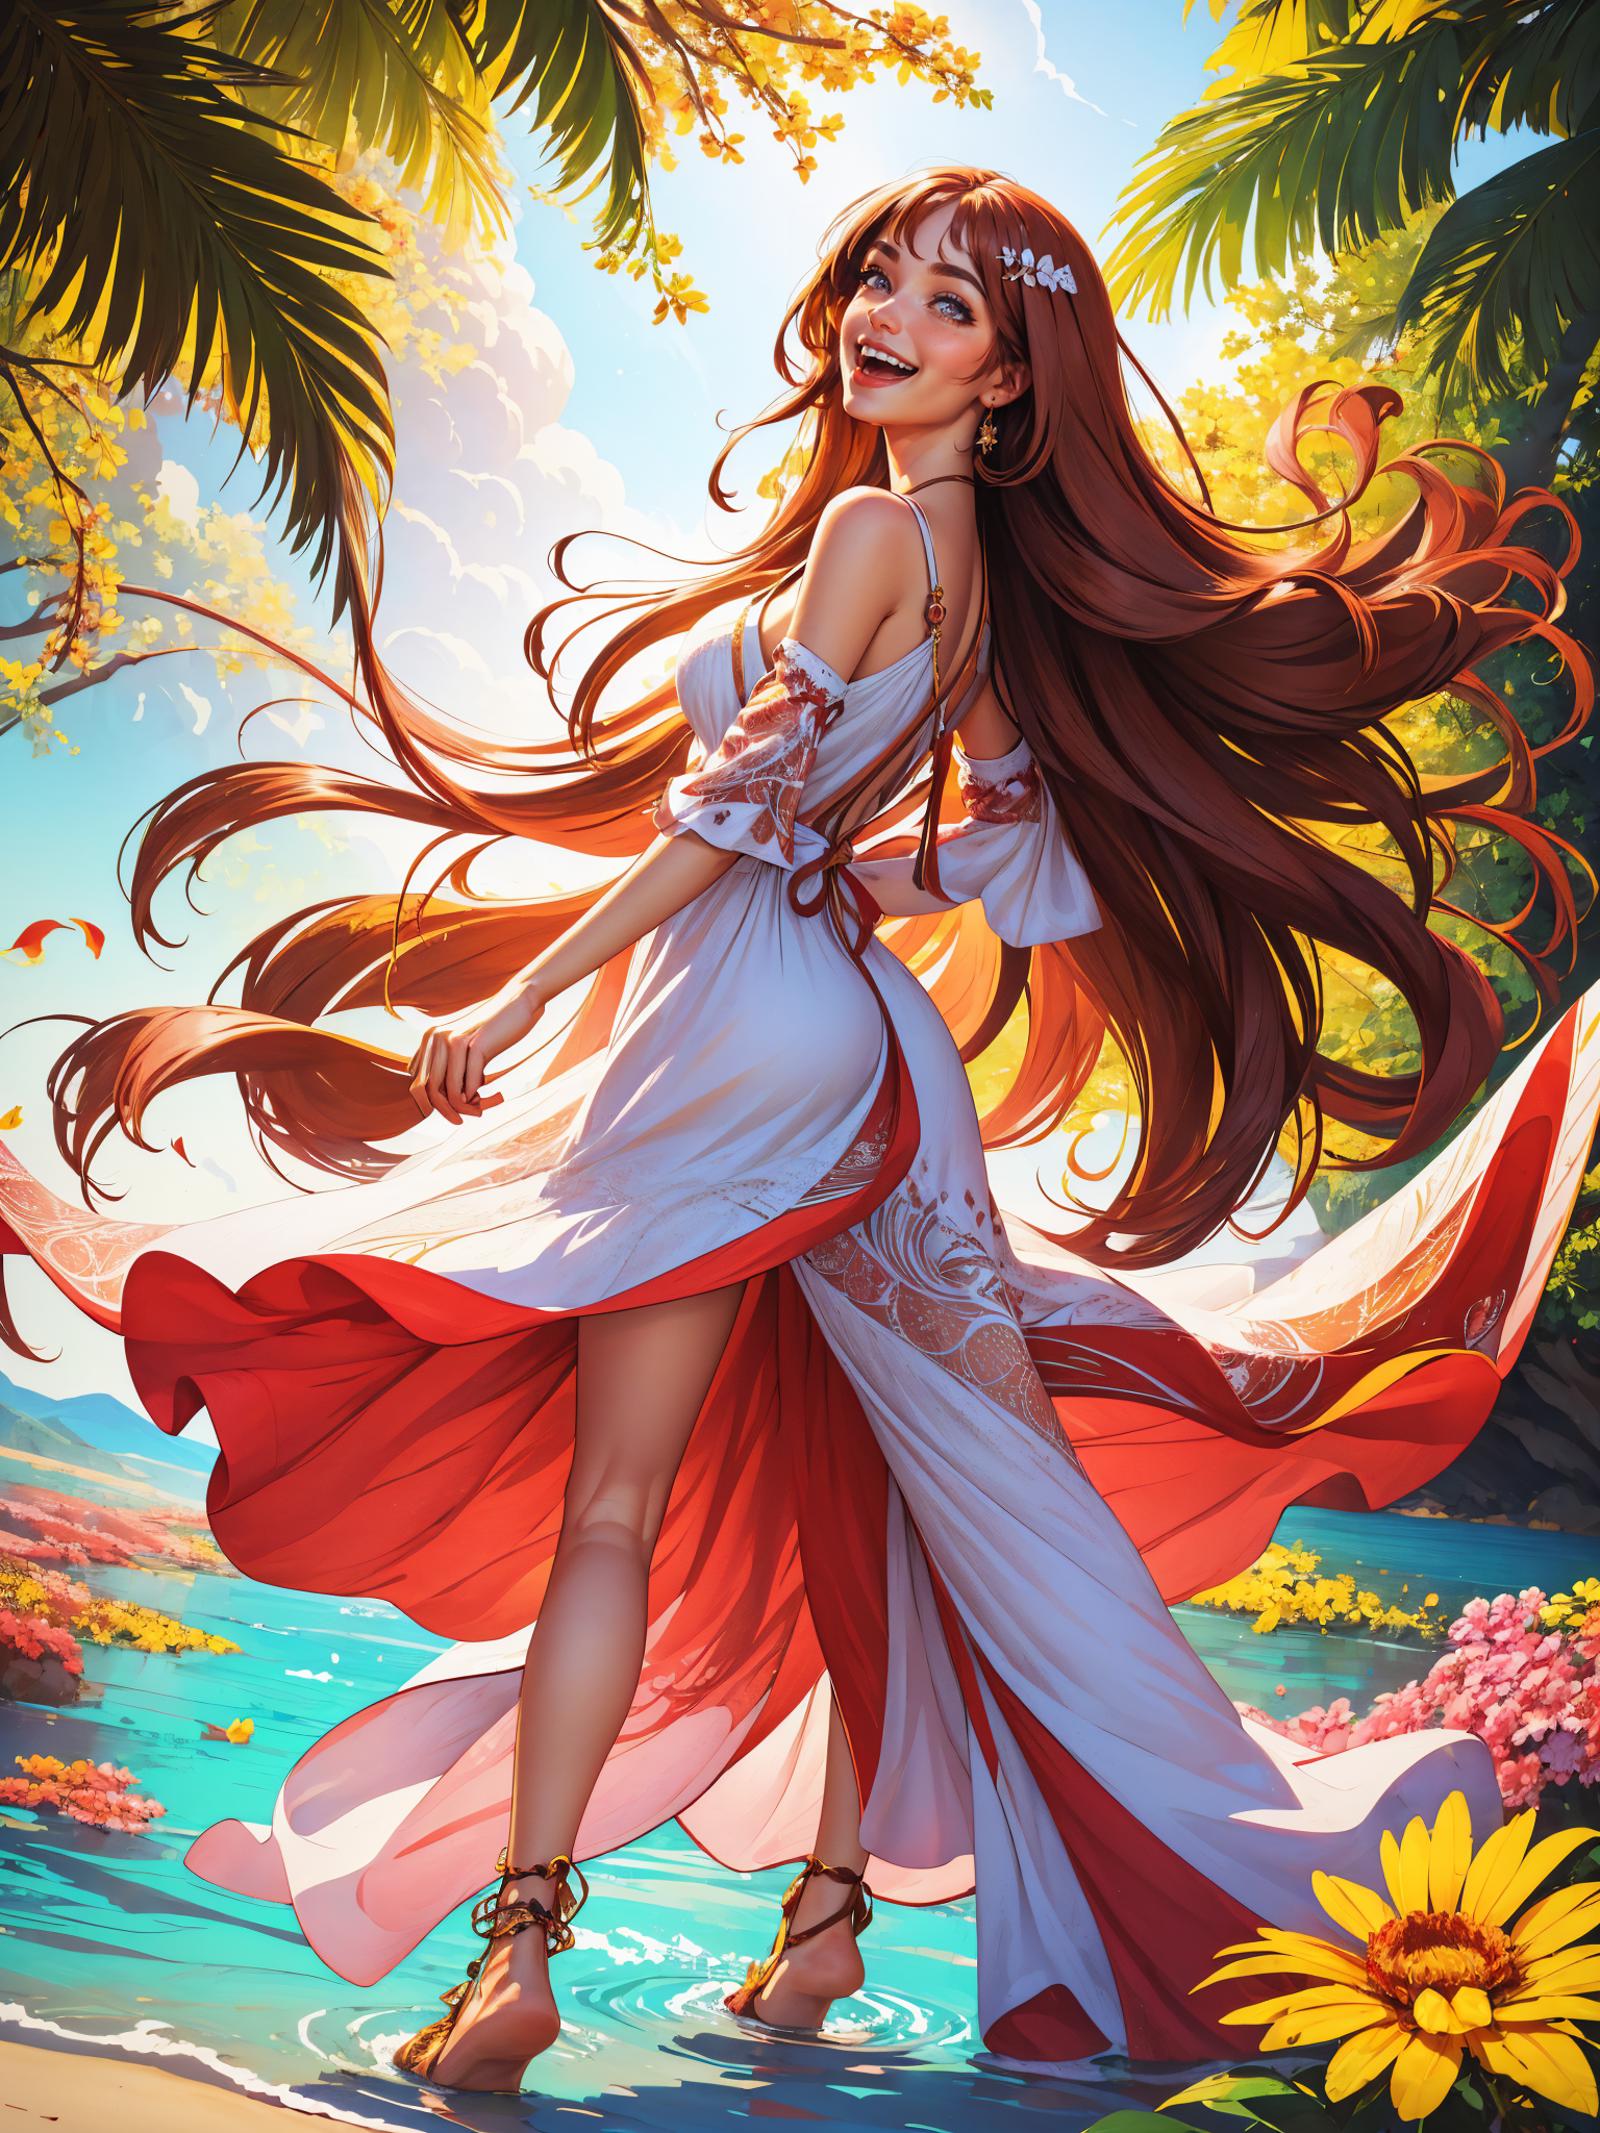 A pretty girl wearing a white dress with a red skirt stands on a beach.